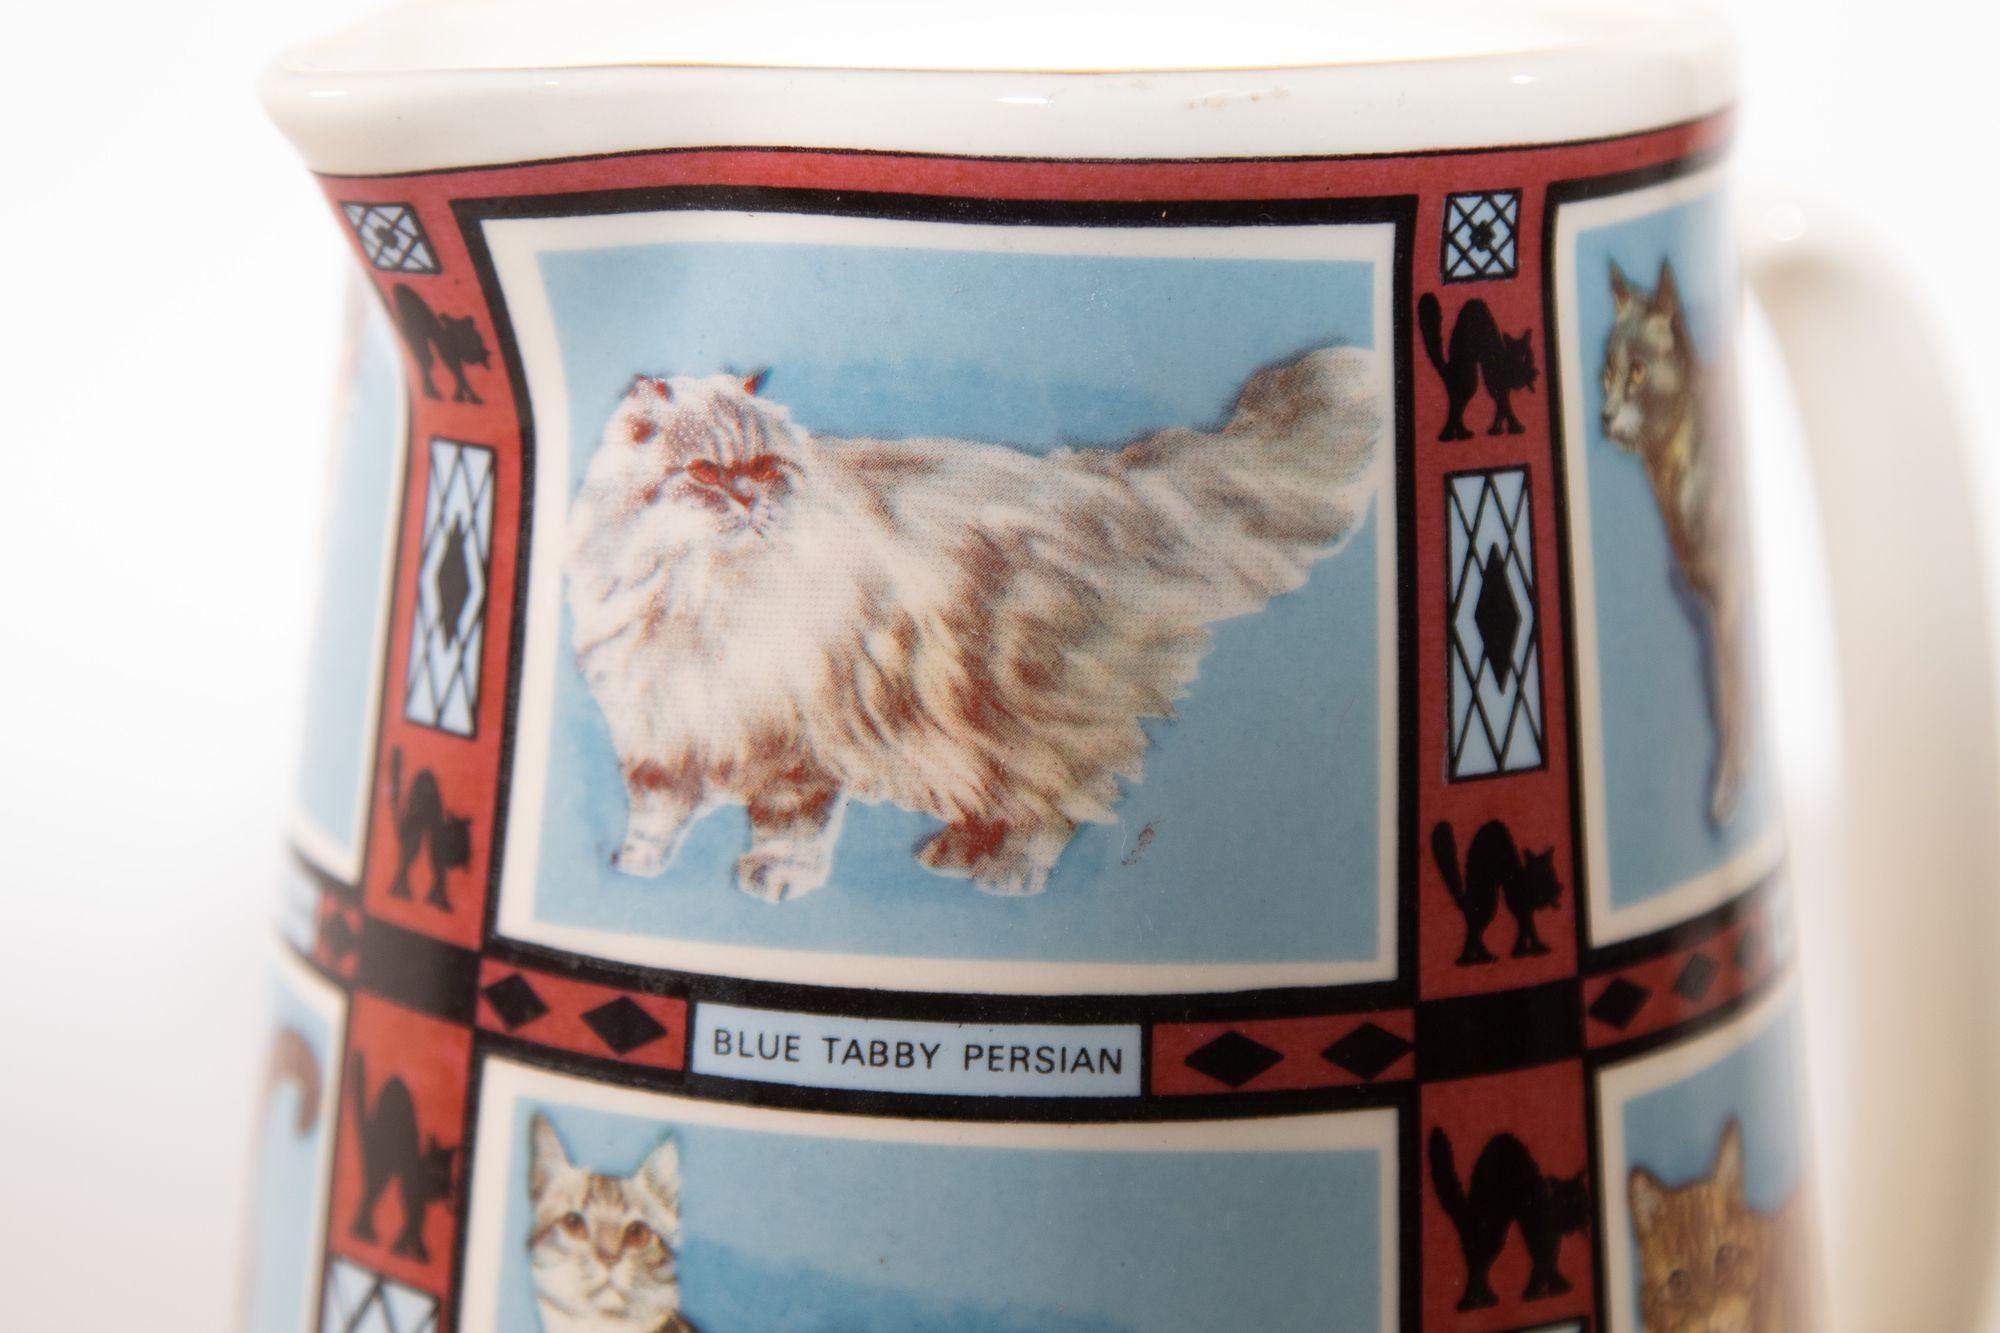 Vintage 1970s Ceramic Pitcher, Derbyshire England with Cat Breeds Pictures 1